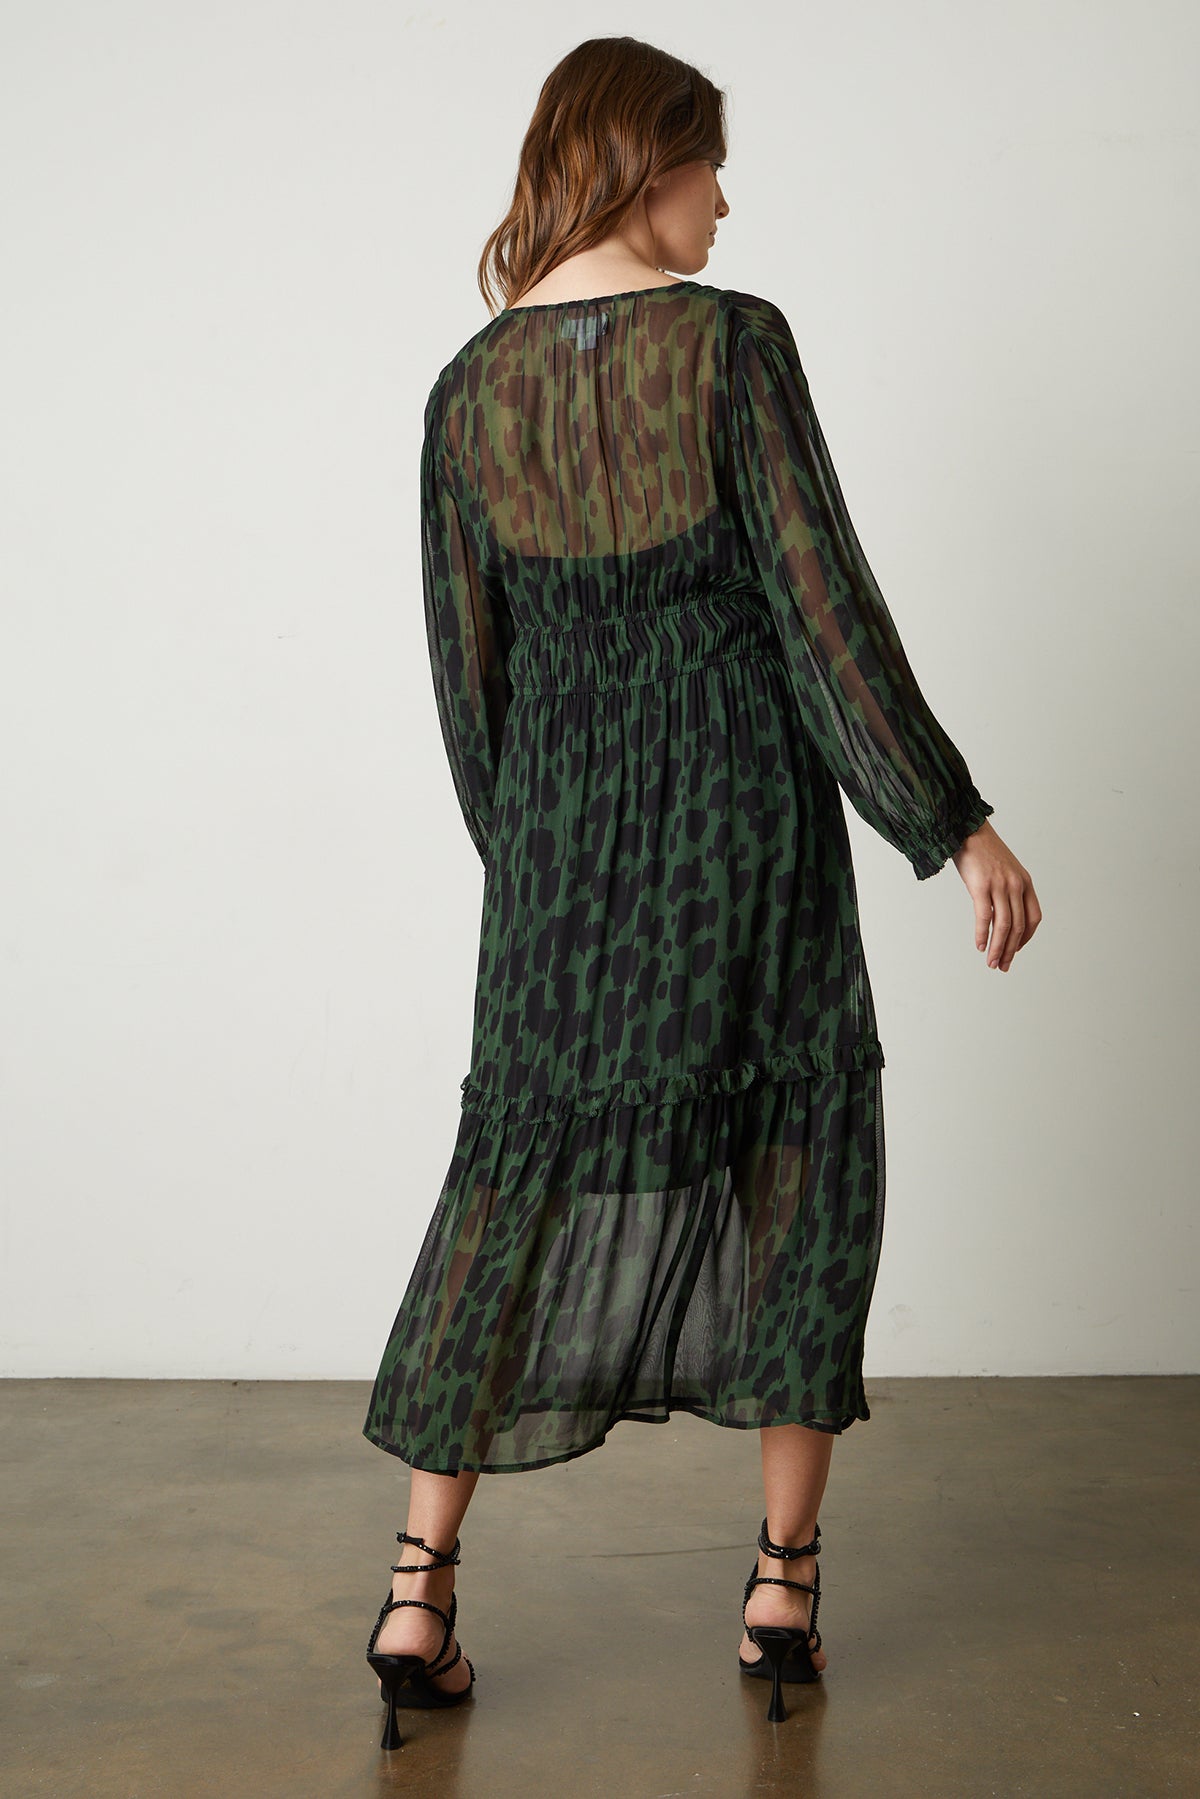 Kendra Printed Maxi Dress in green and black airbrush print with black sandals full length back-25669297504449